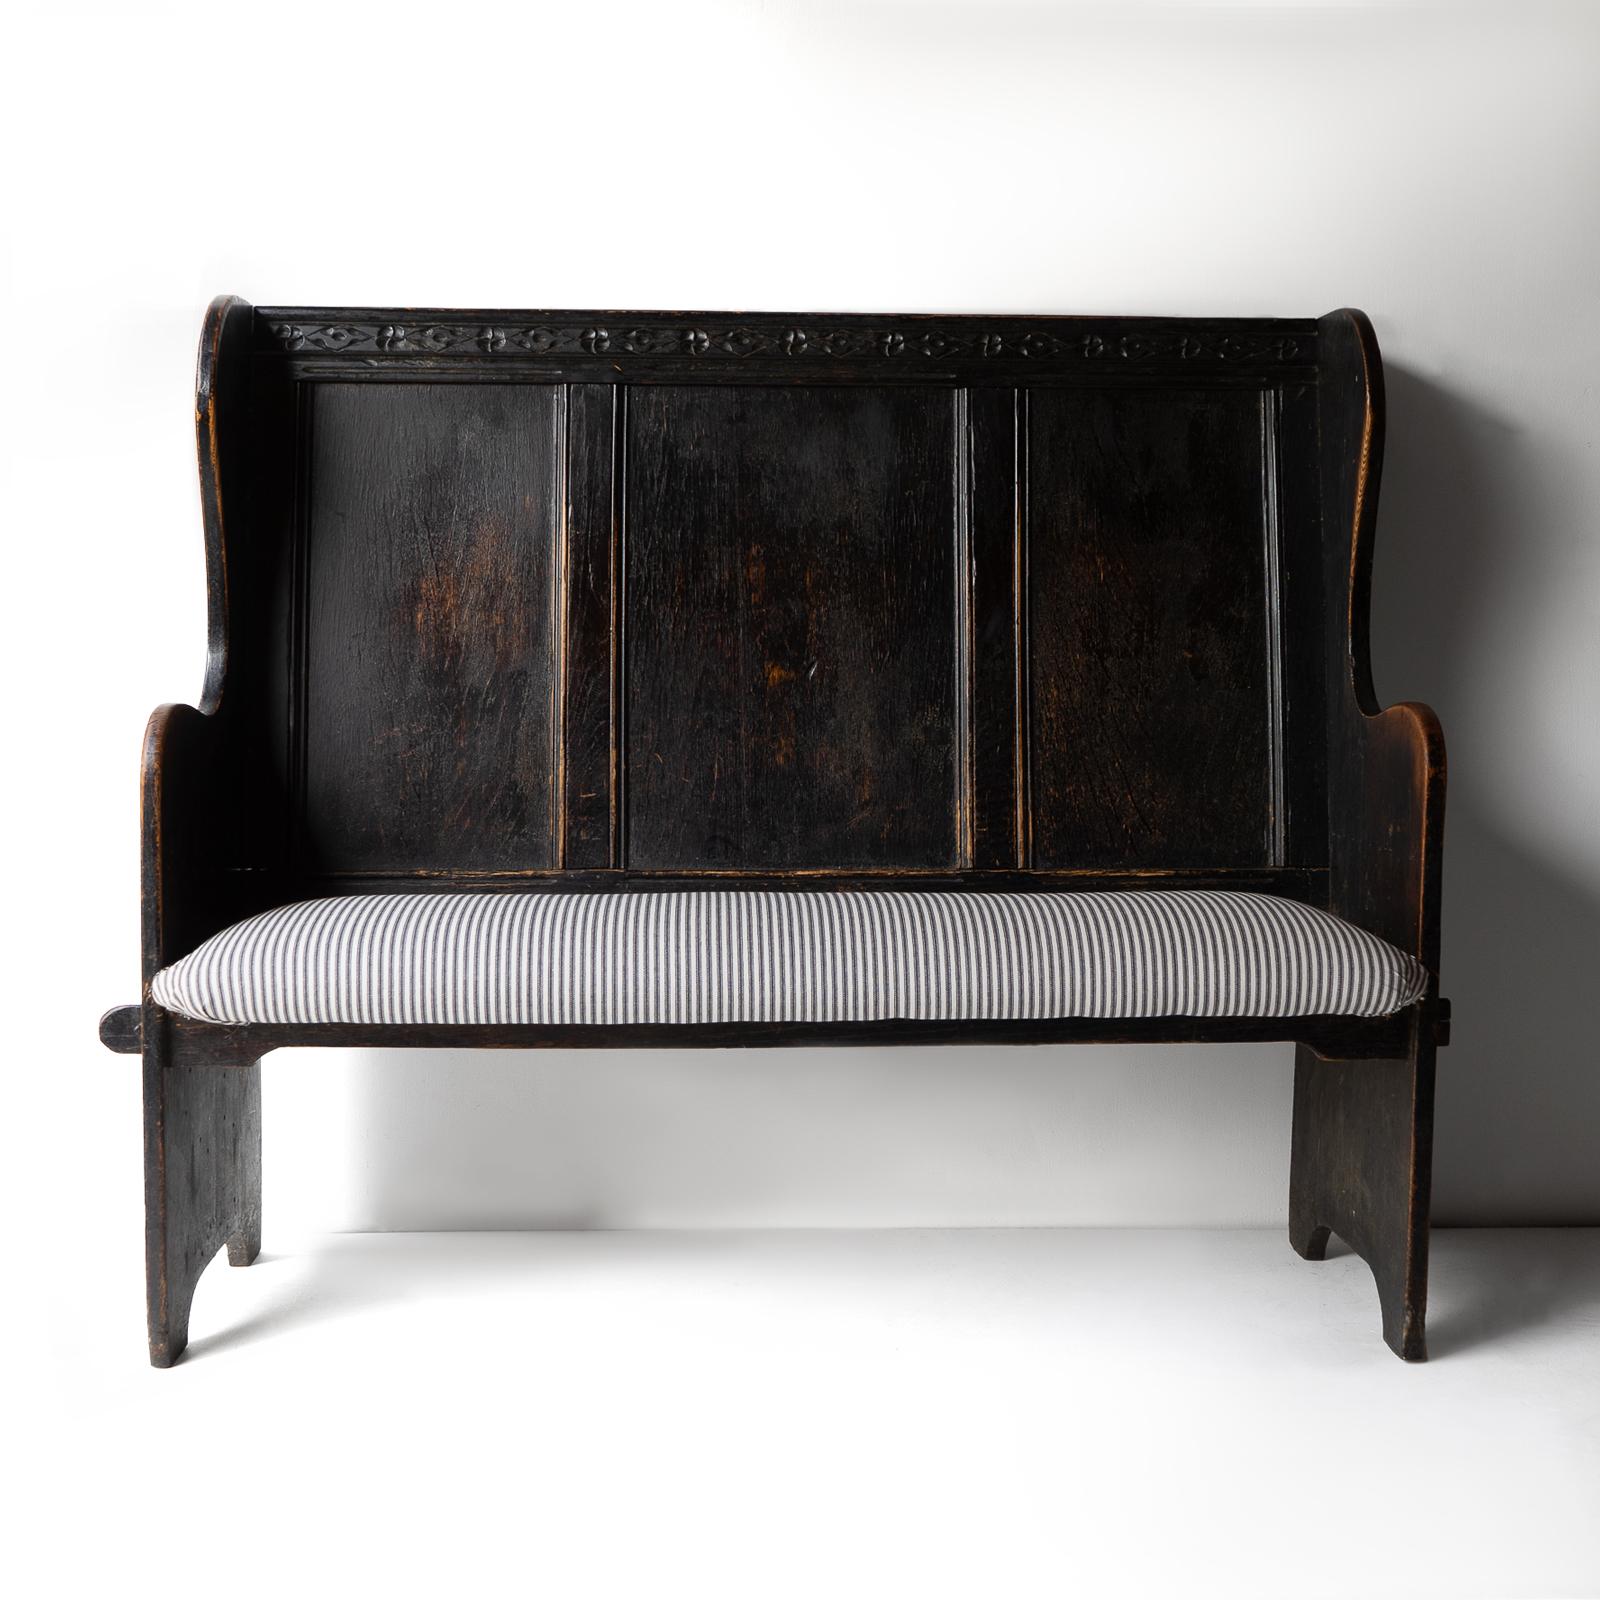 ANTIQUE SETTLE

Originally made to be used to sit next to fires to keep the warmth in homes and taverns settles also make great hall benches or work well in kitchens or dining rooms as seating up to a dining table.

Made from ebonised solid oak this